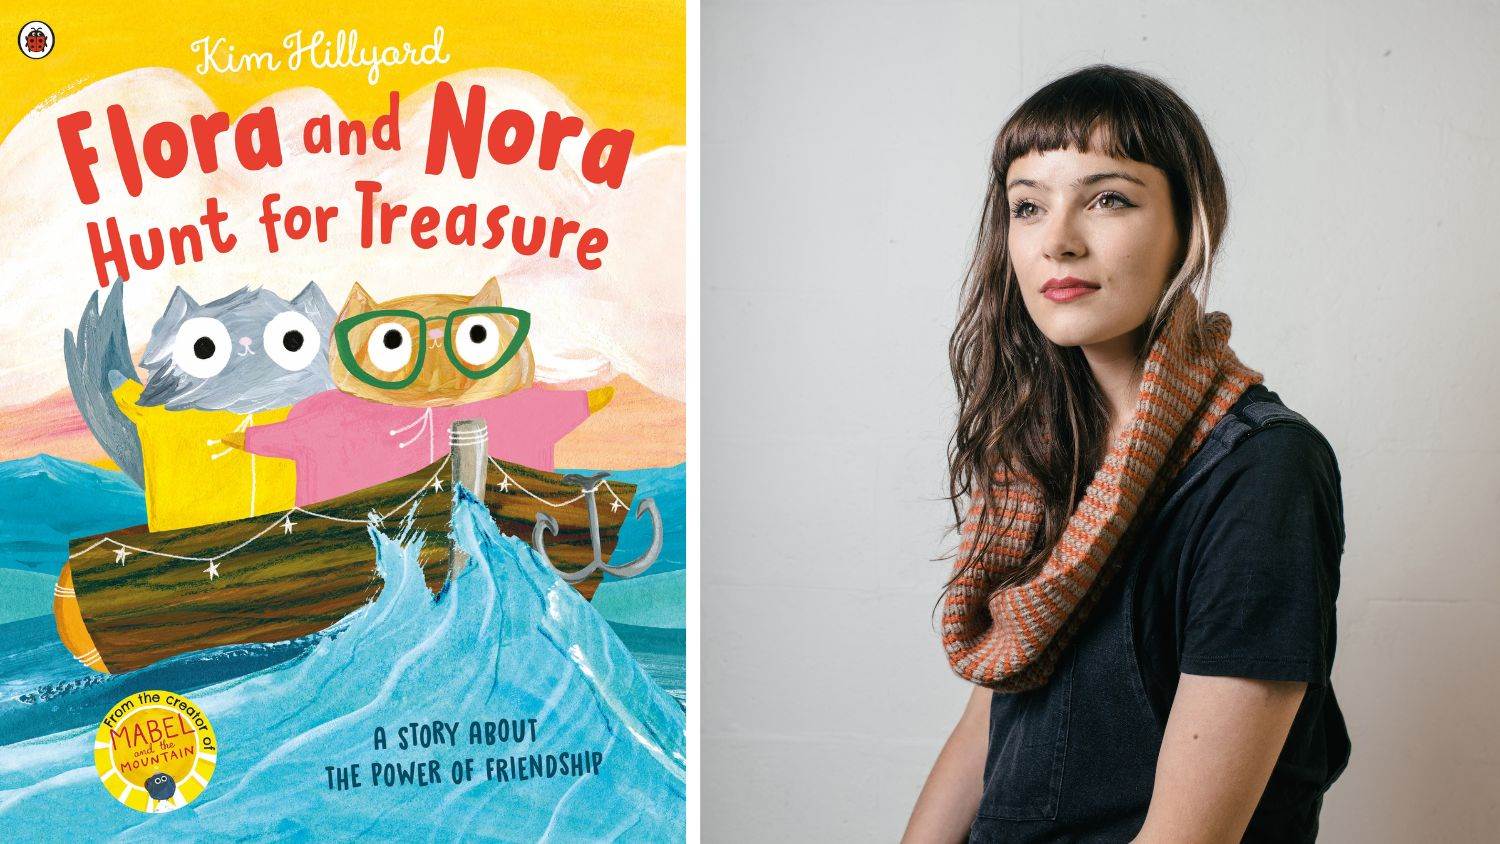 Author-illustrator Kim Hillyard and the cover of Flora and Nora Hunt for Treasure